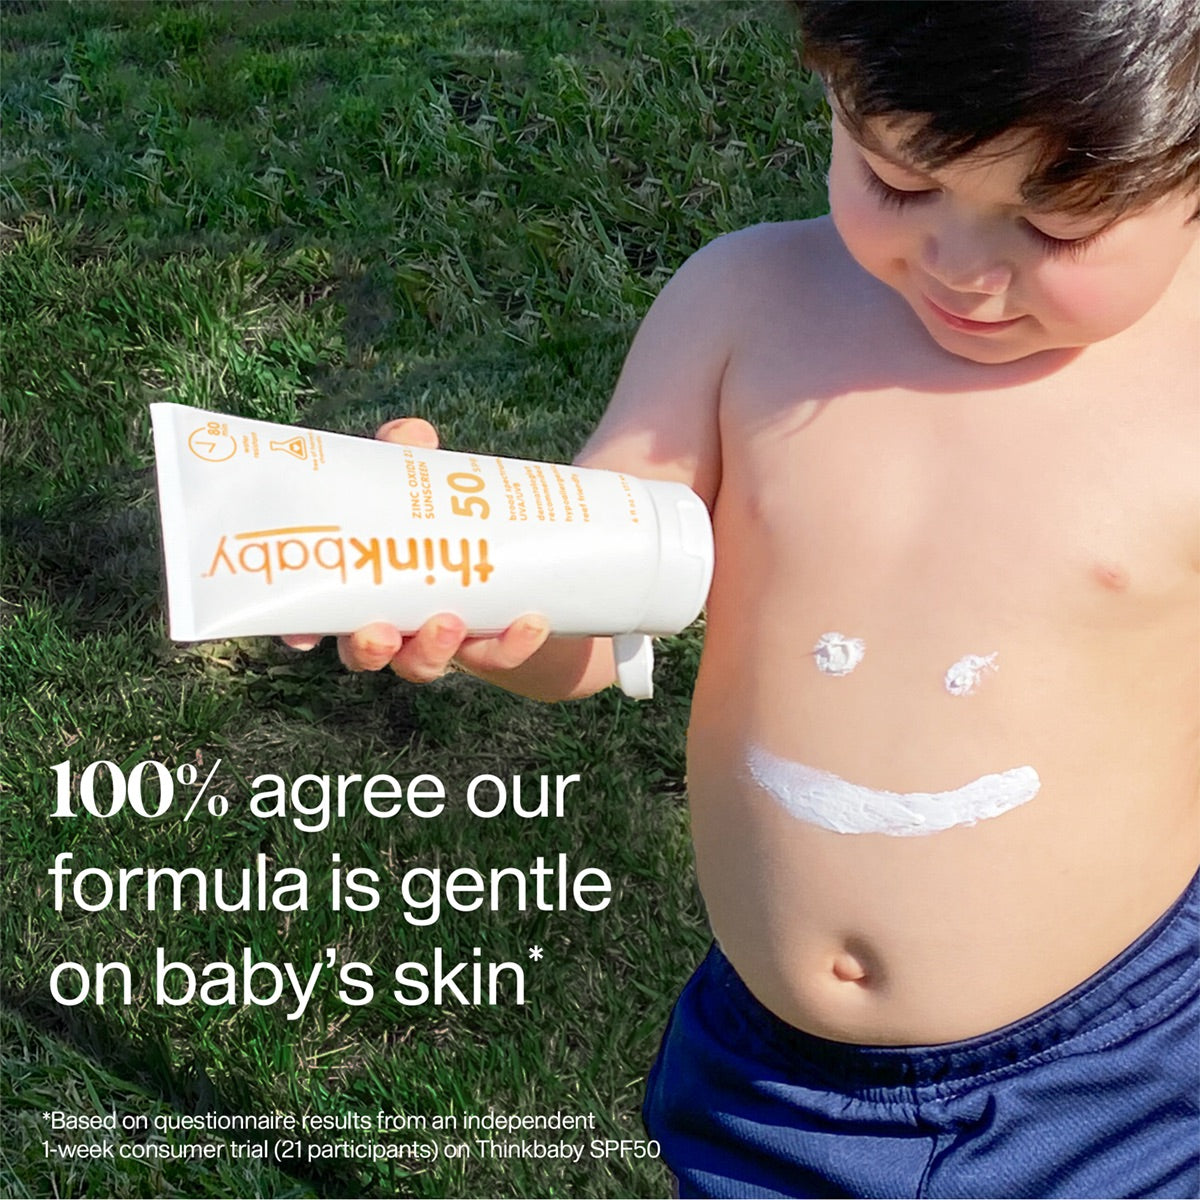 A young child is shown holding a tube of Thinkbaby SPF 50 sunscreen, with sunscreen applied in a smiley face pattern on the child&#39;s belly, accompanied by text saying &#39;100% agree our formula is gentle on baby&#39;s skin.&#39;